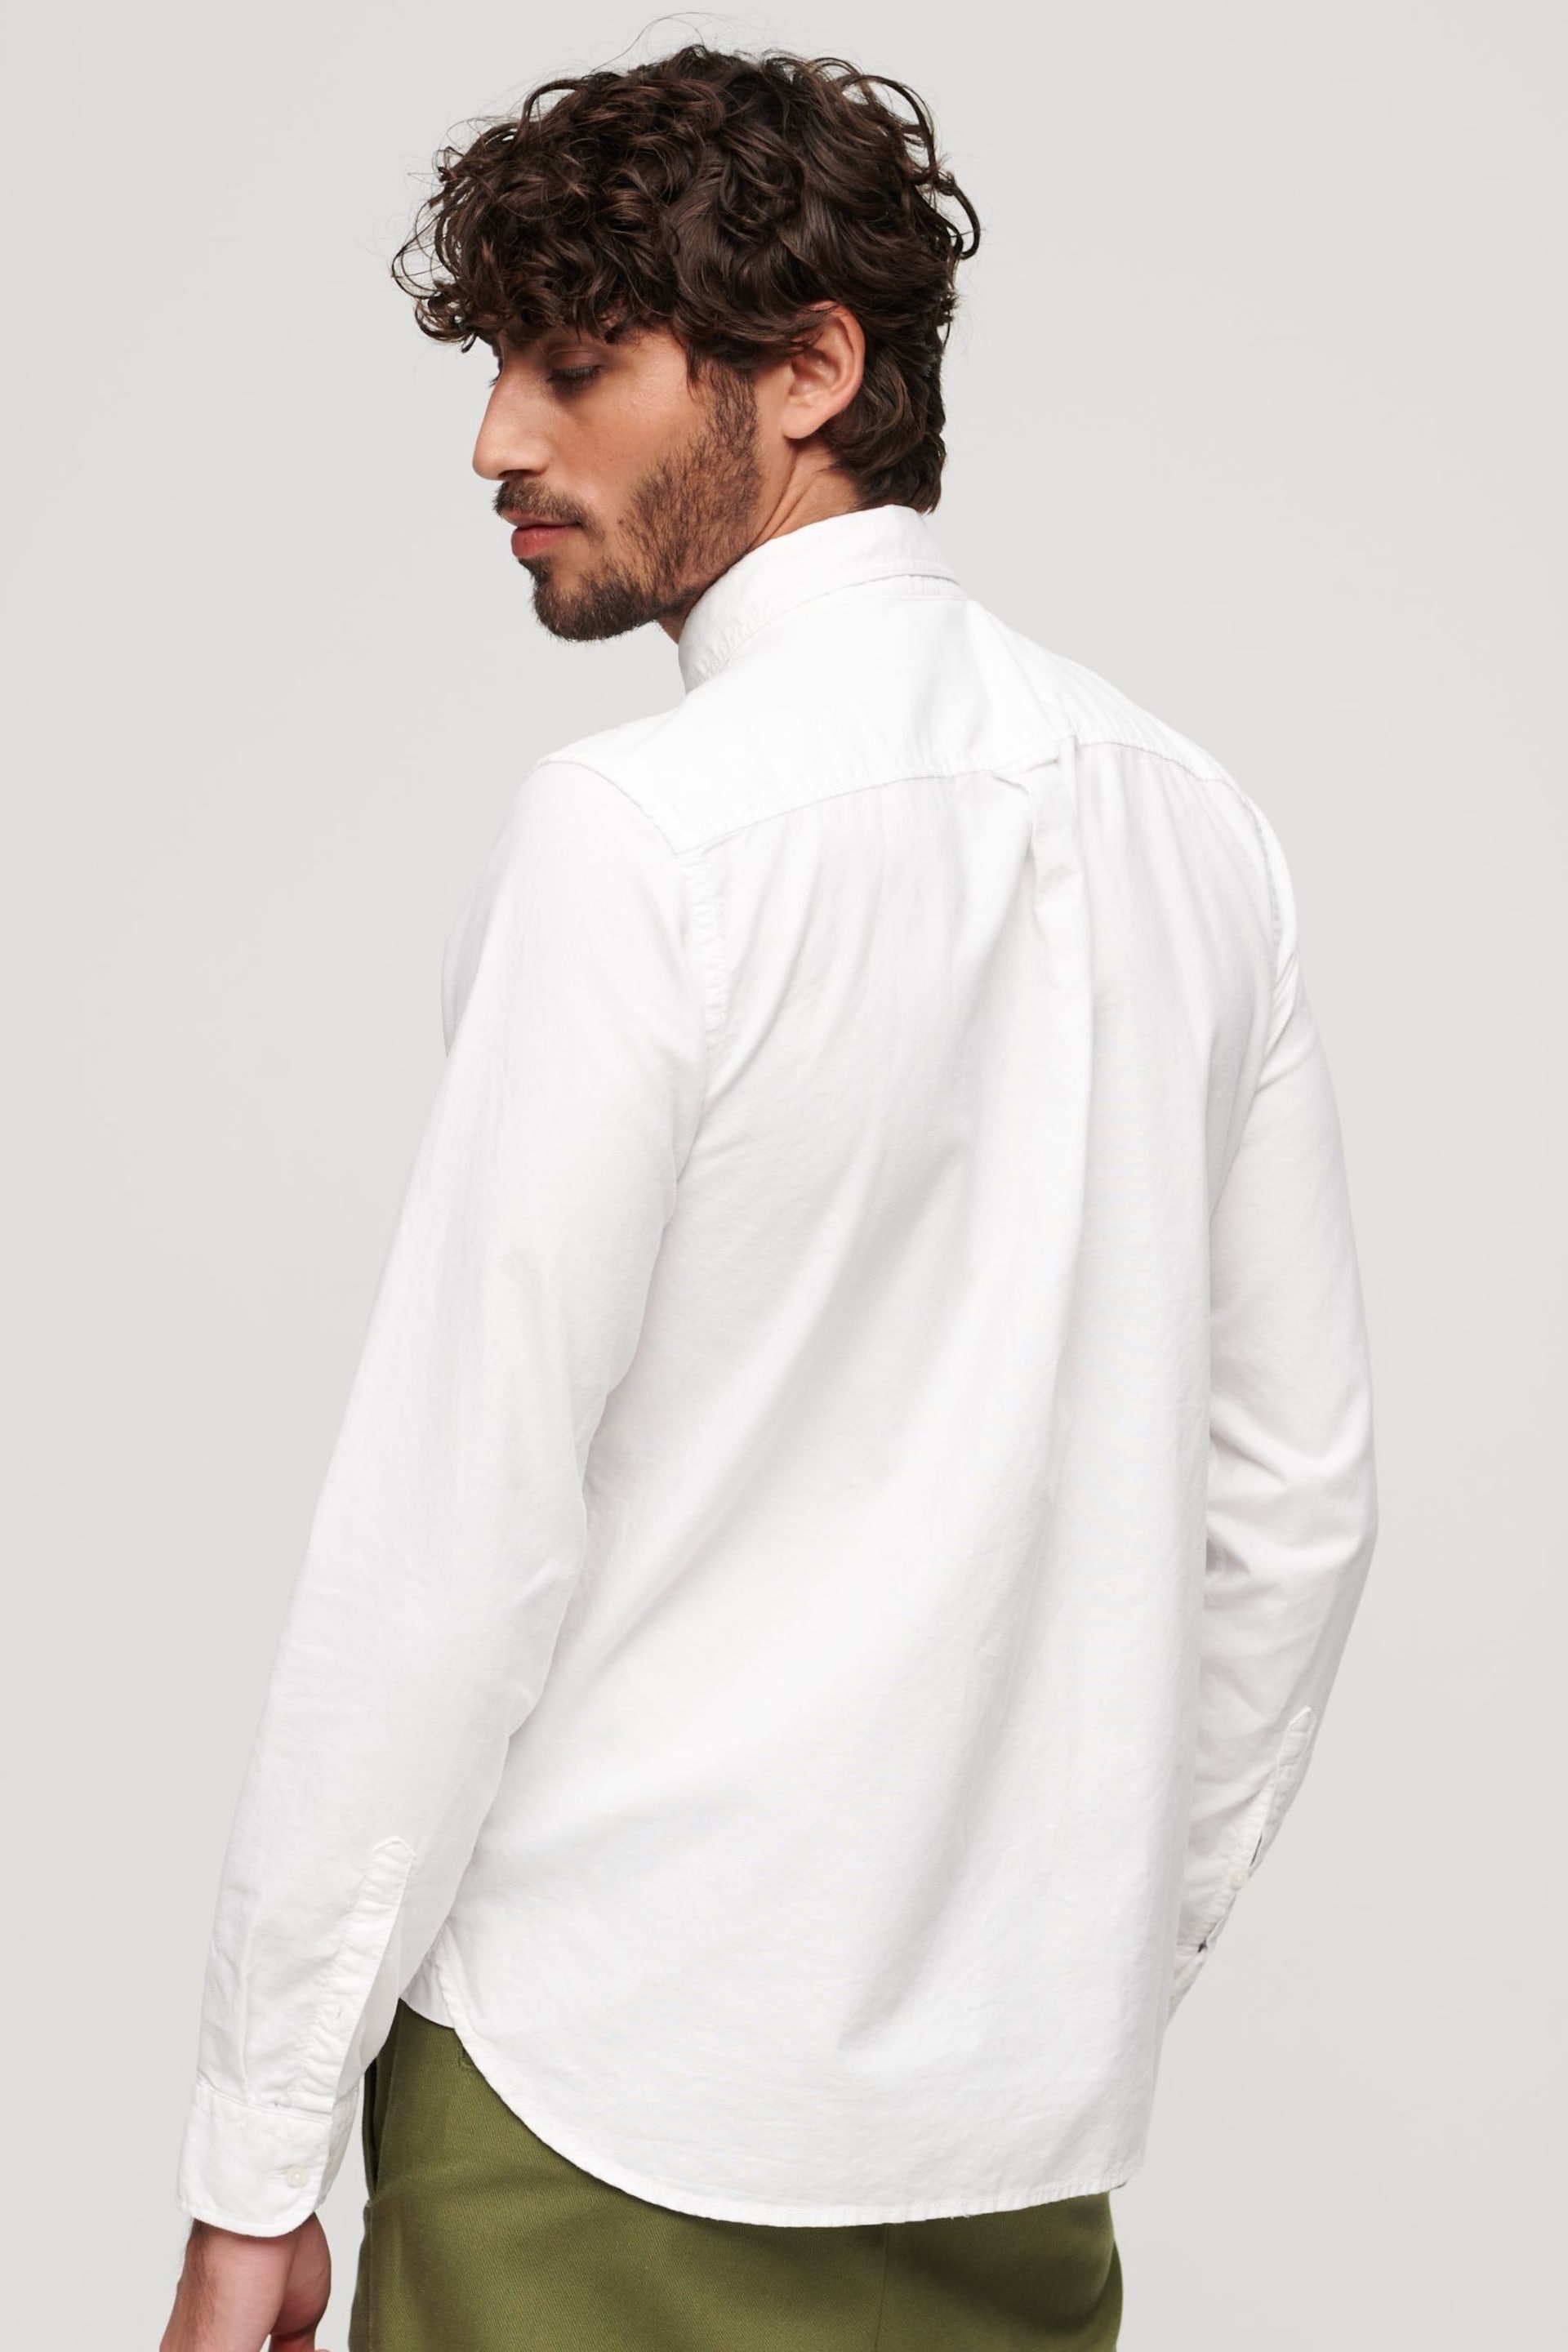 Superdry White Cotton Long Sleeved Oxford Shirt - Image 2 of 6